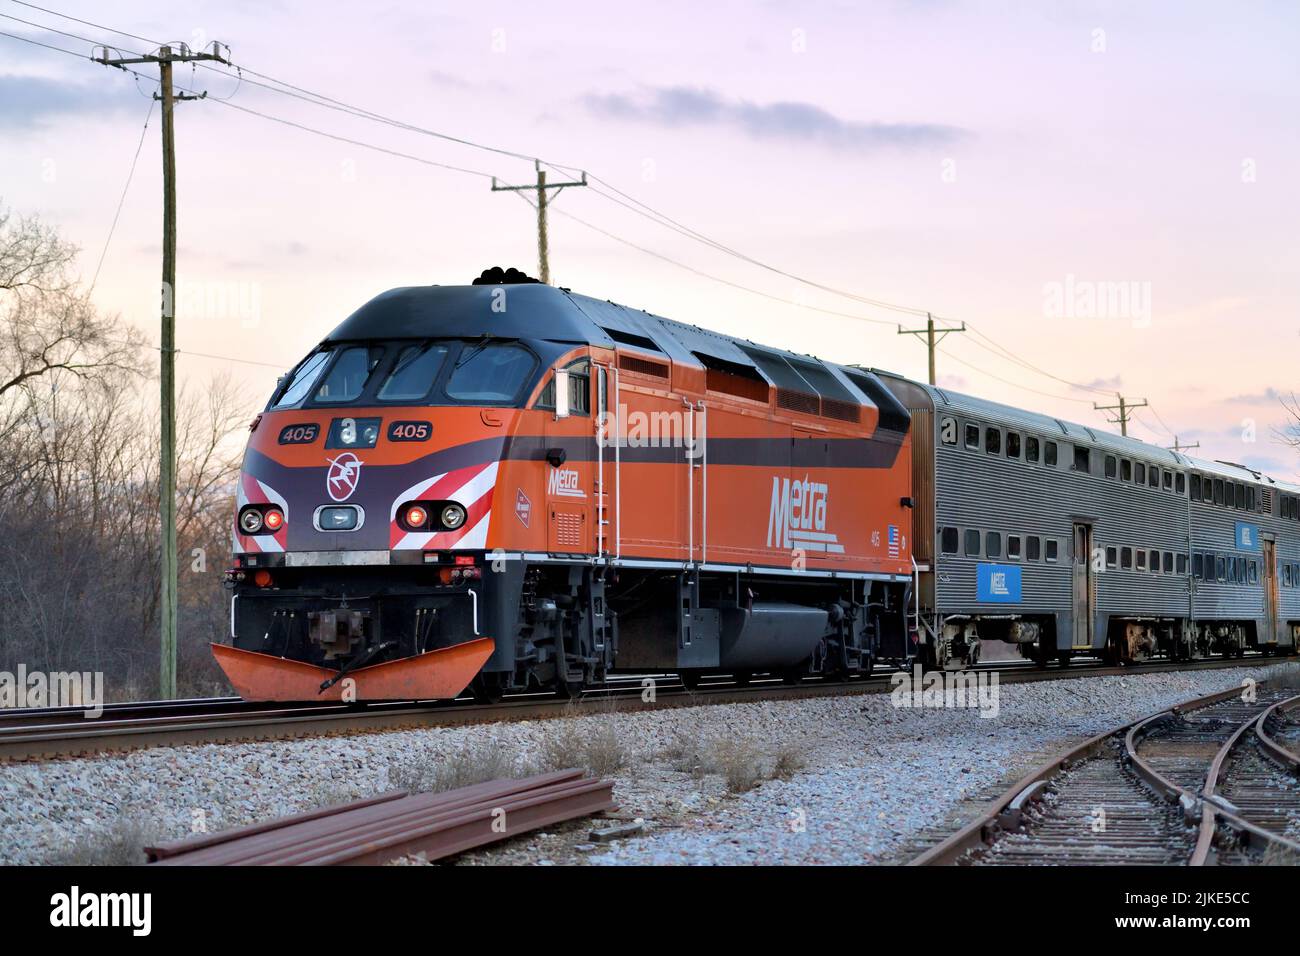 Bartlett, Illinois, USA. A Metra locomotive pushing a commuter train on its journey to Chicago. Stock Photo